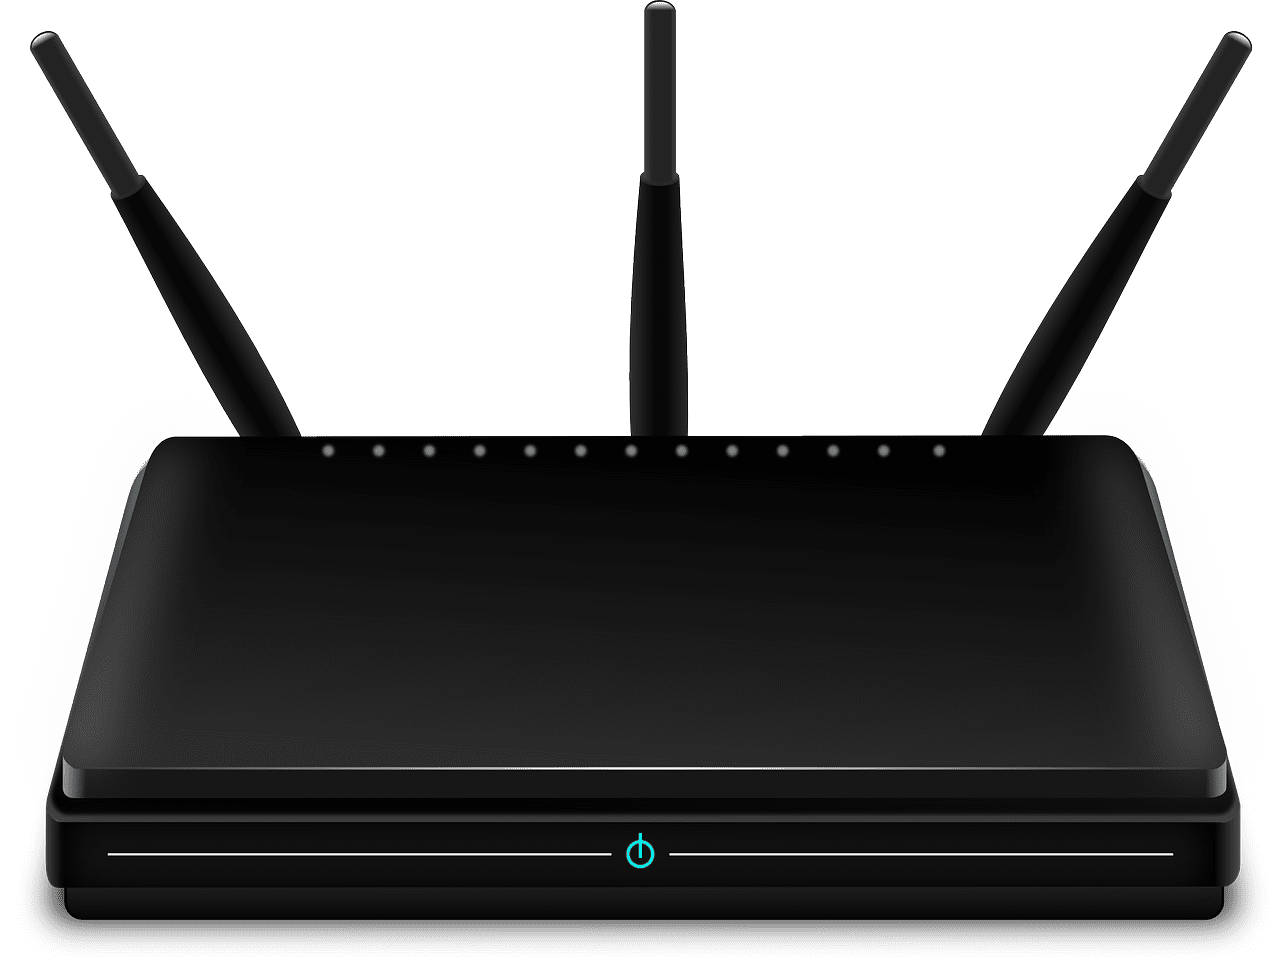 Top 8 best wireless access point to buy in 2020 cover image